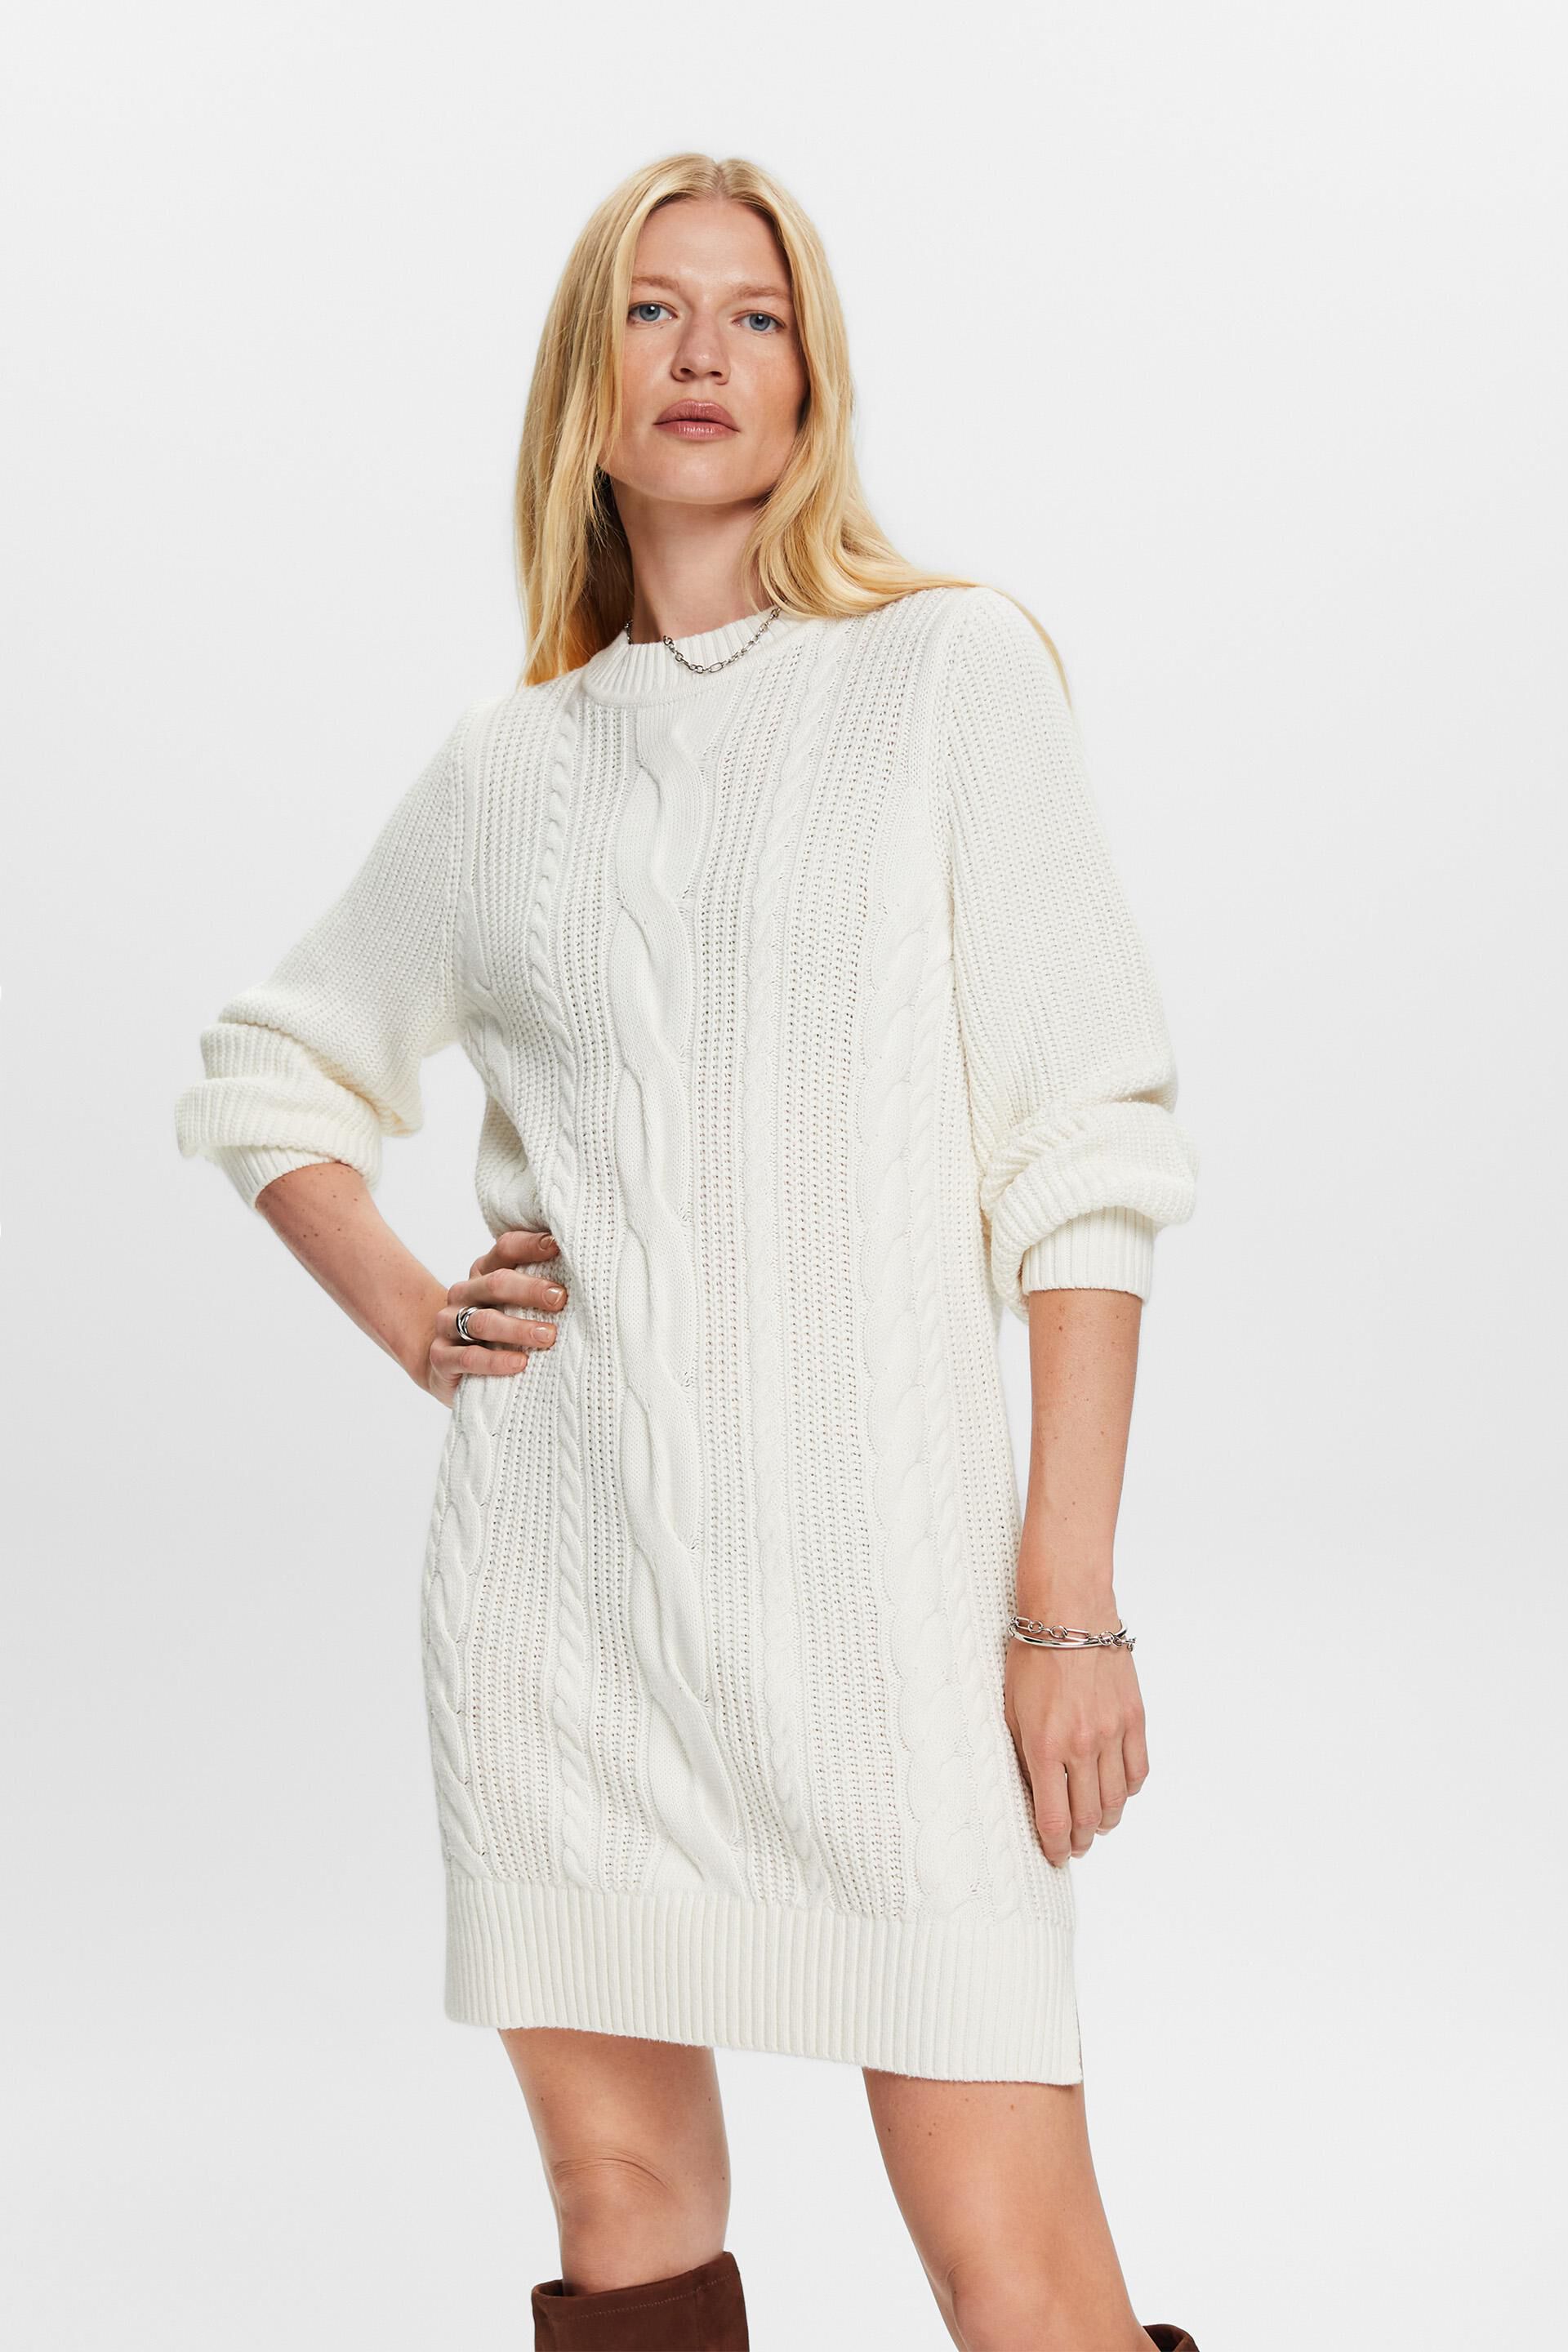 Esprit Knit Cable Dress Wool-Blend Sweater